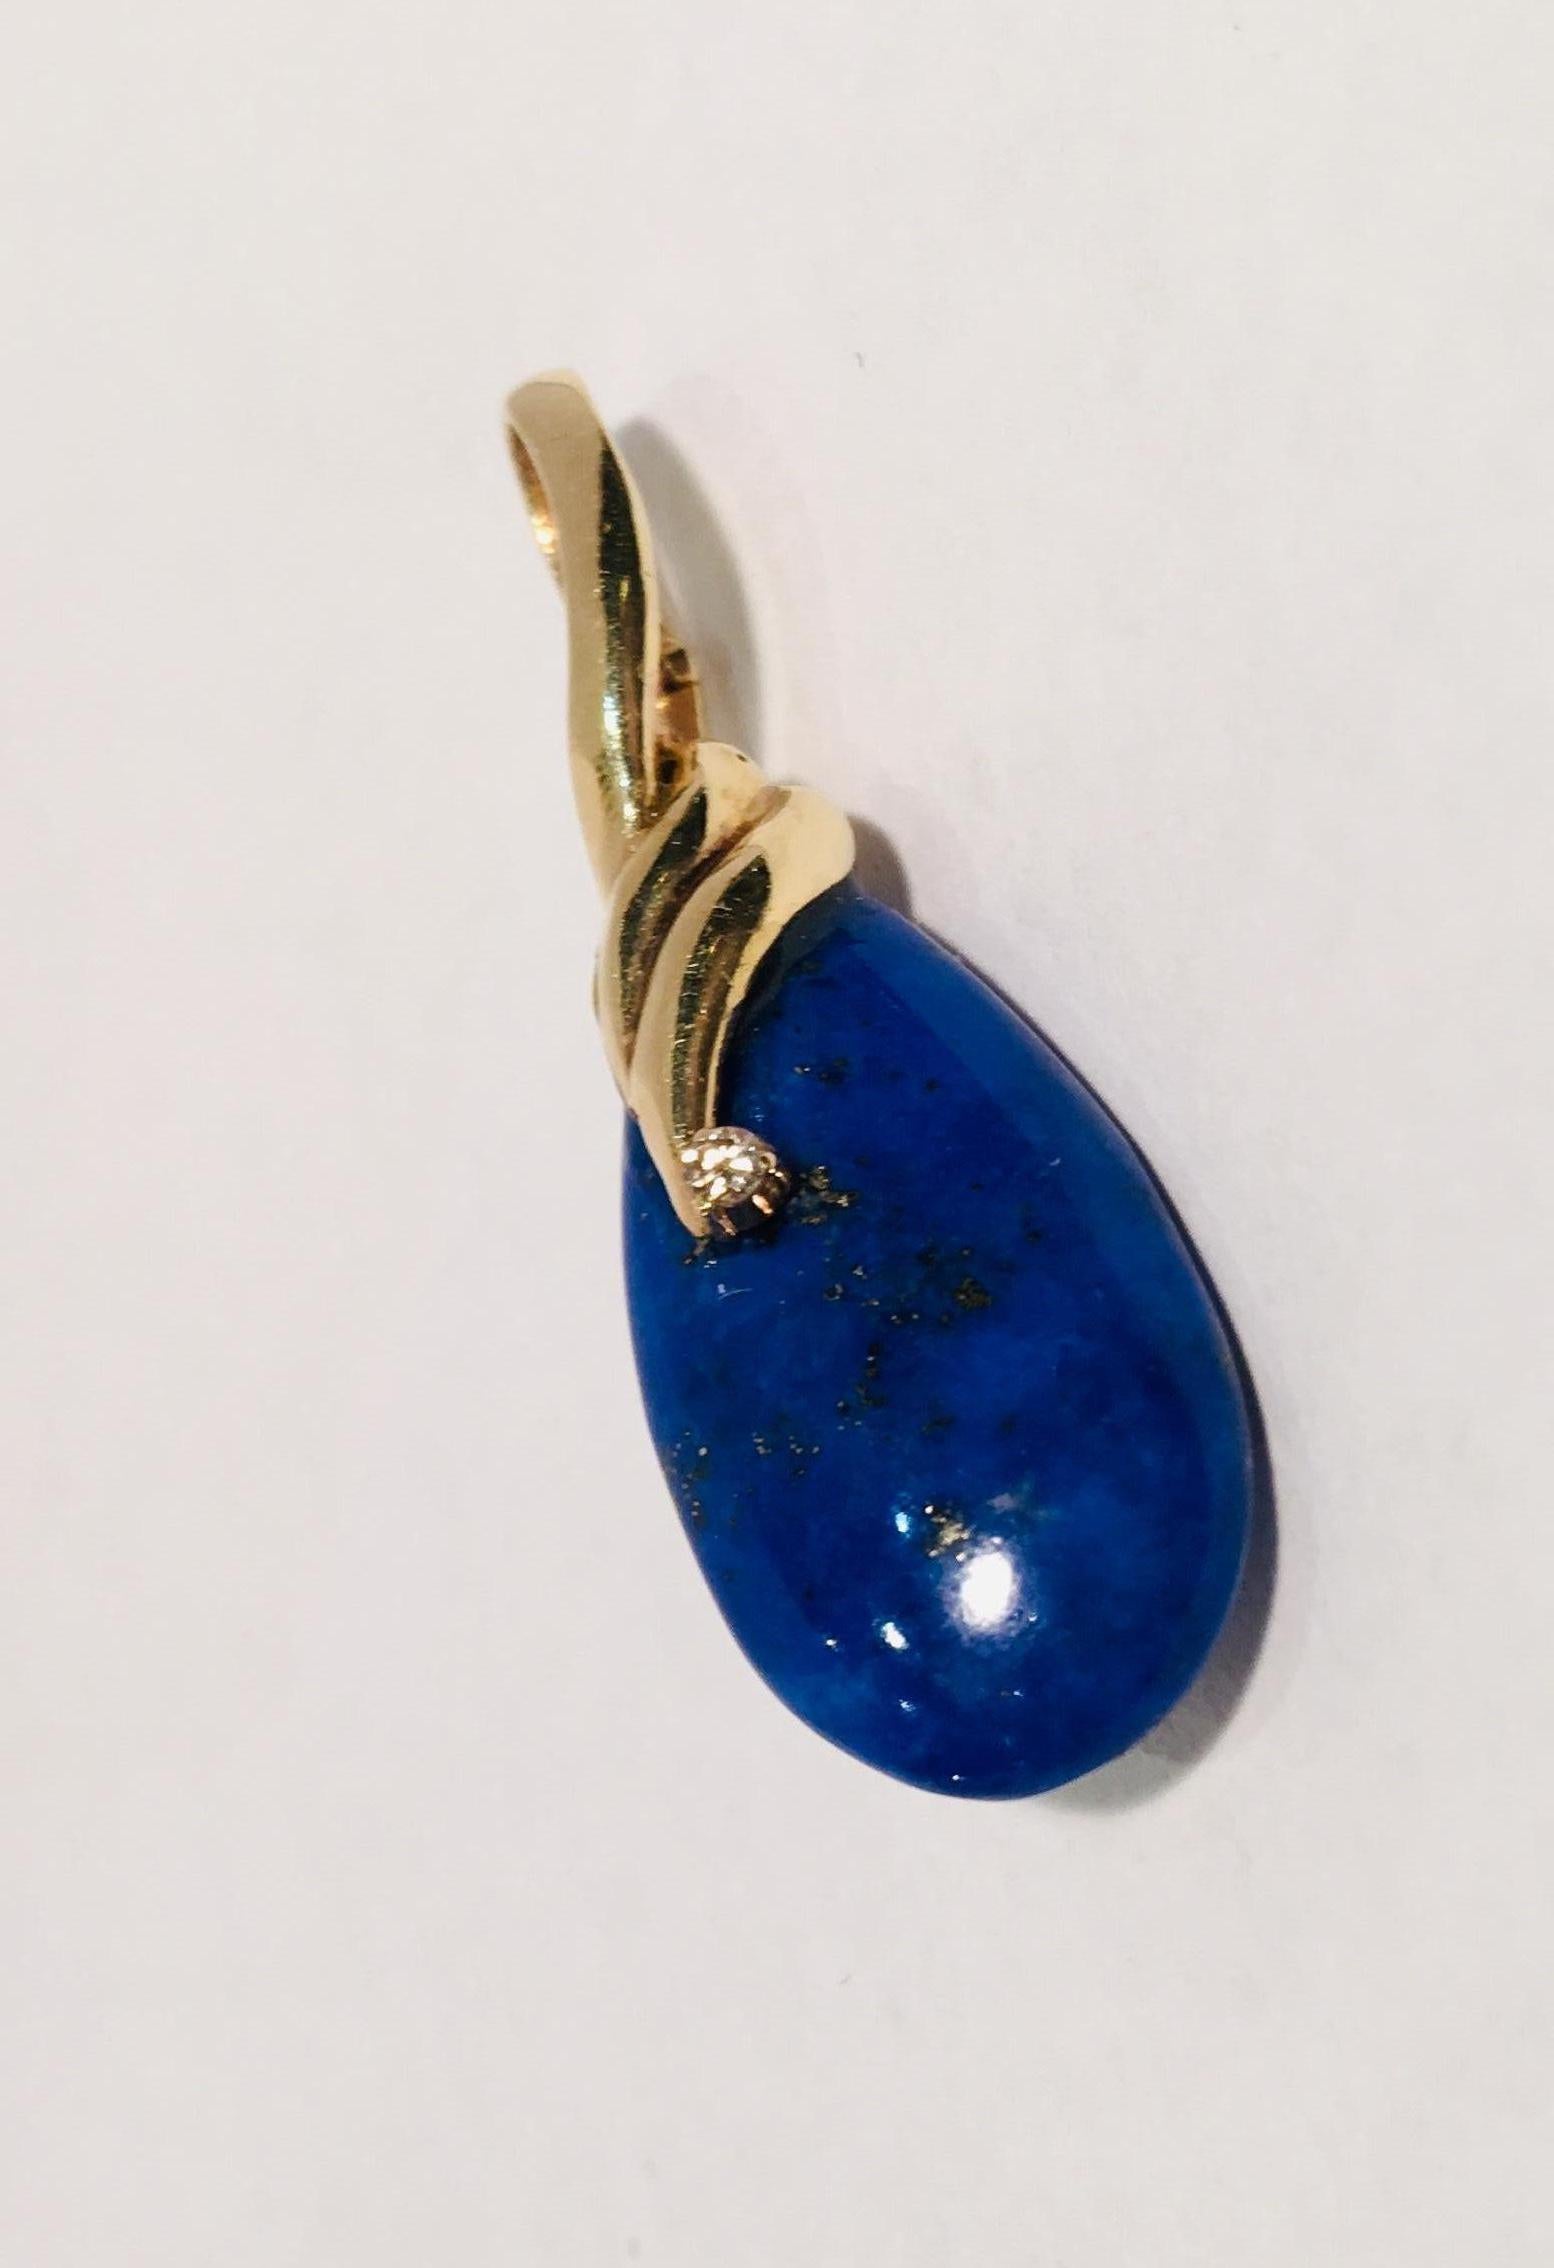 Lovely estate pendant features a teardrop or pear shaped, hand-cut, bright blue lapis lazuli stone, richly flecked with gold and suspended from the enhancer bale with a graceful swirl of 14 karat yellow gold and accented by a prong set round